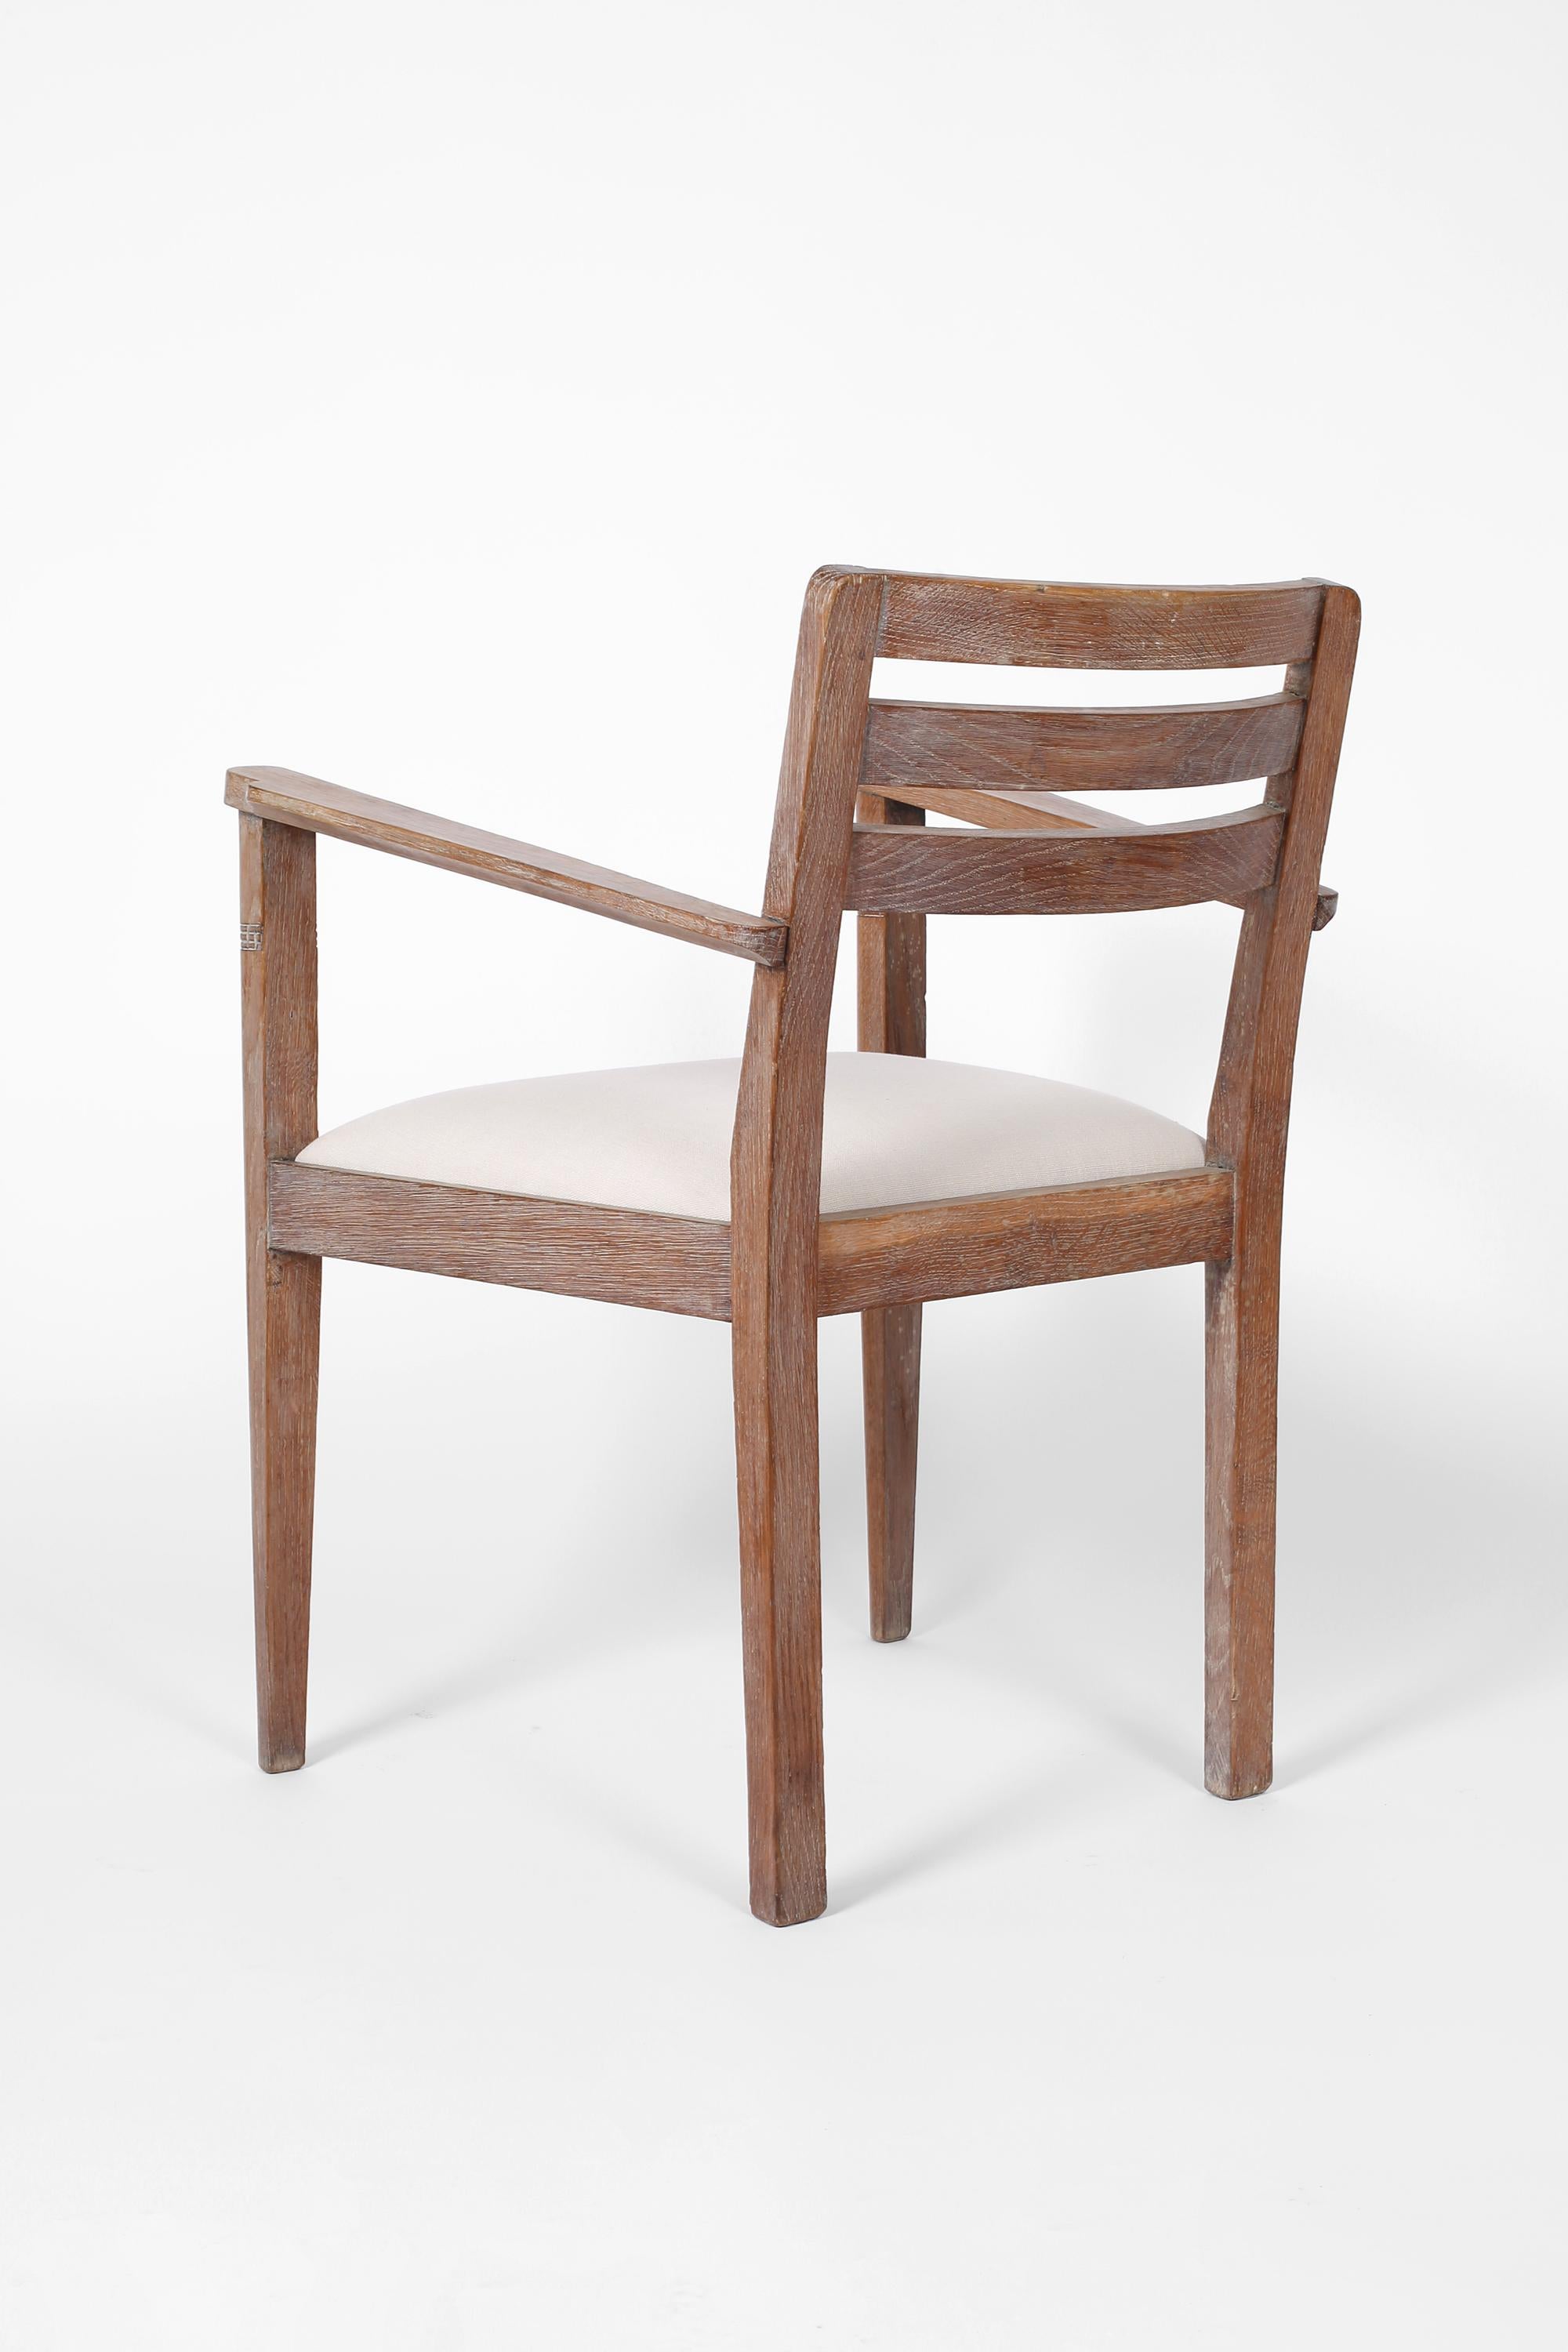 Pair of French Art Deco Limed Oak & Linen Armchairs, C. 1930s For Sale 1